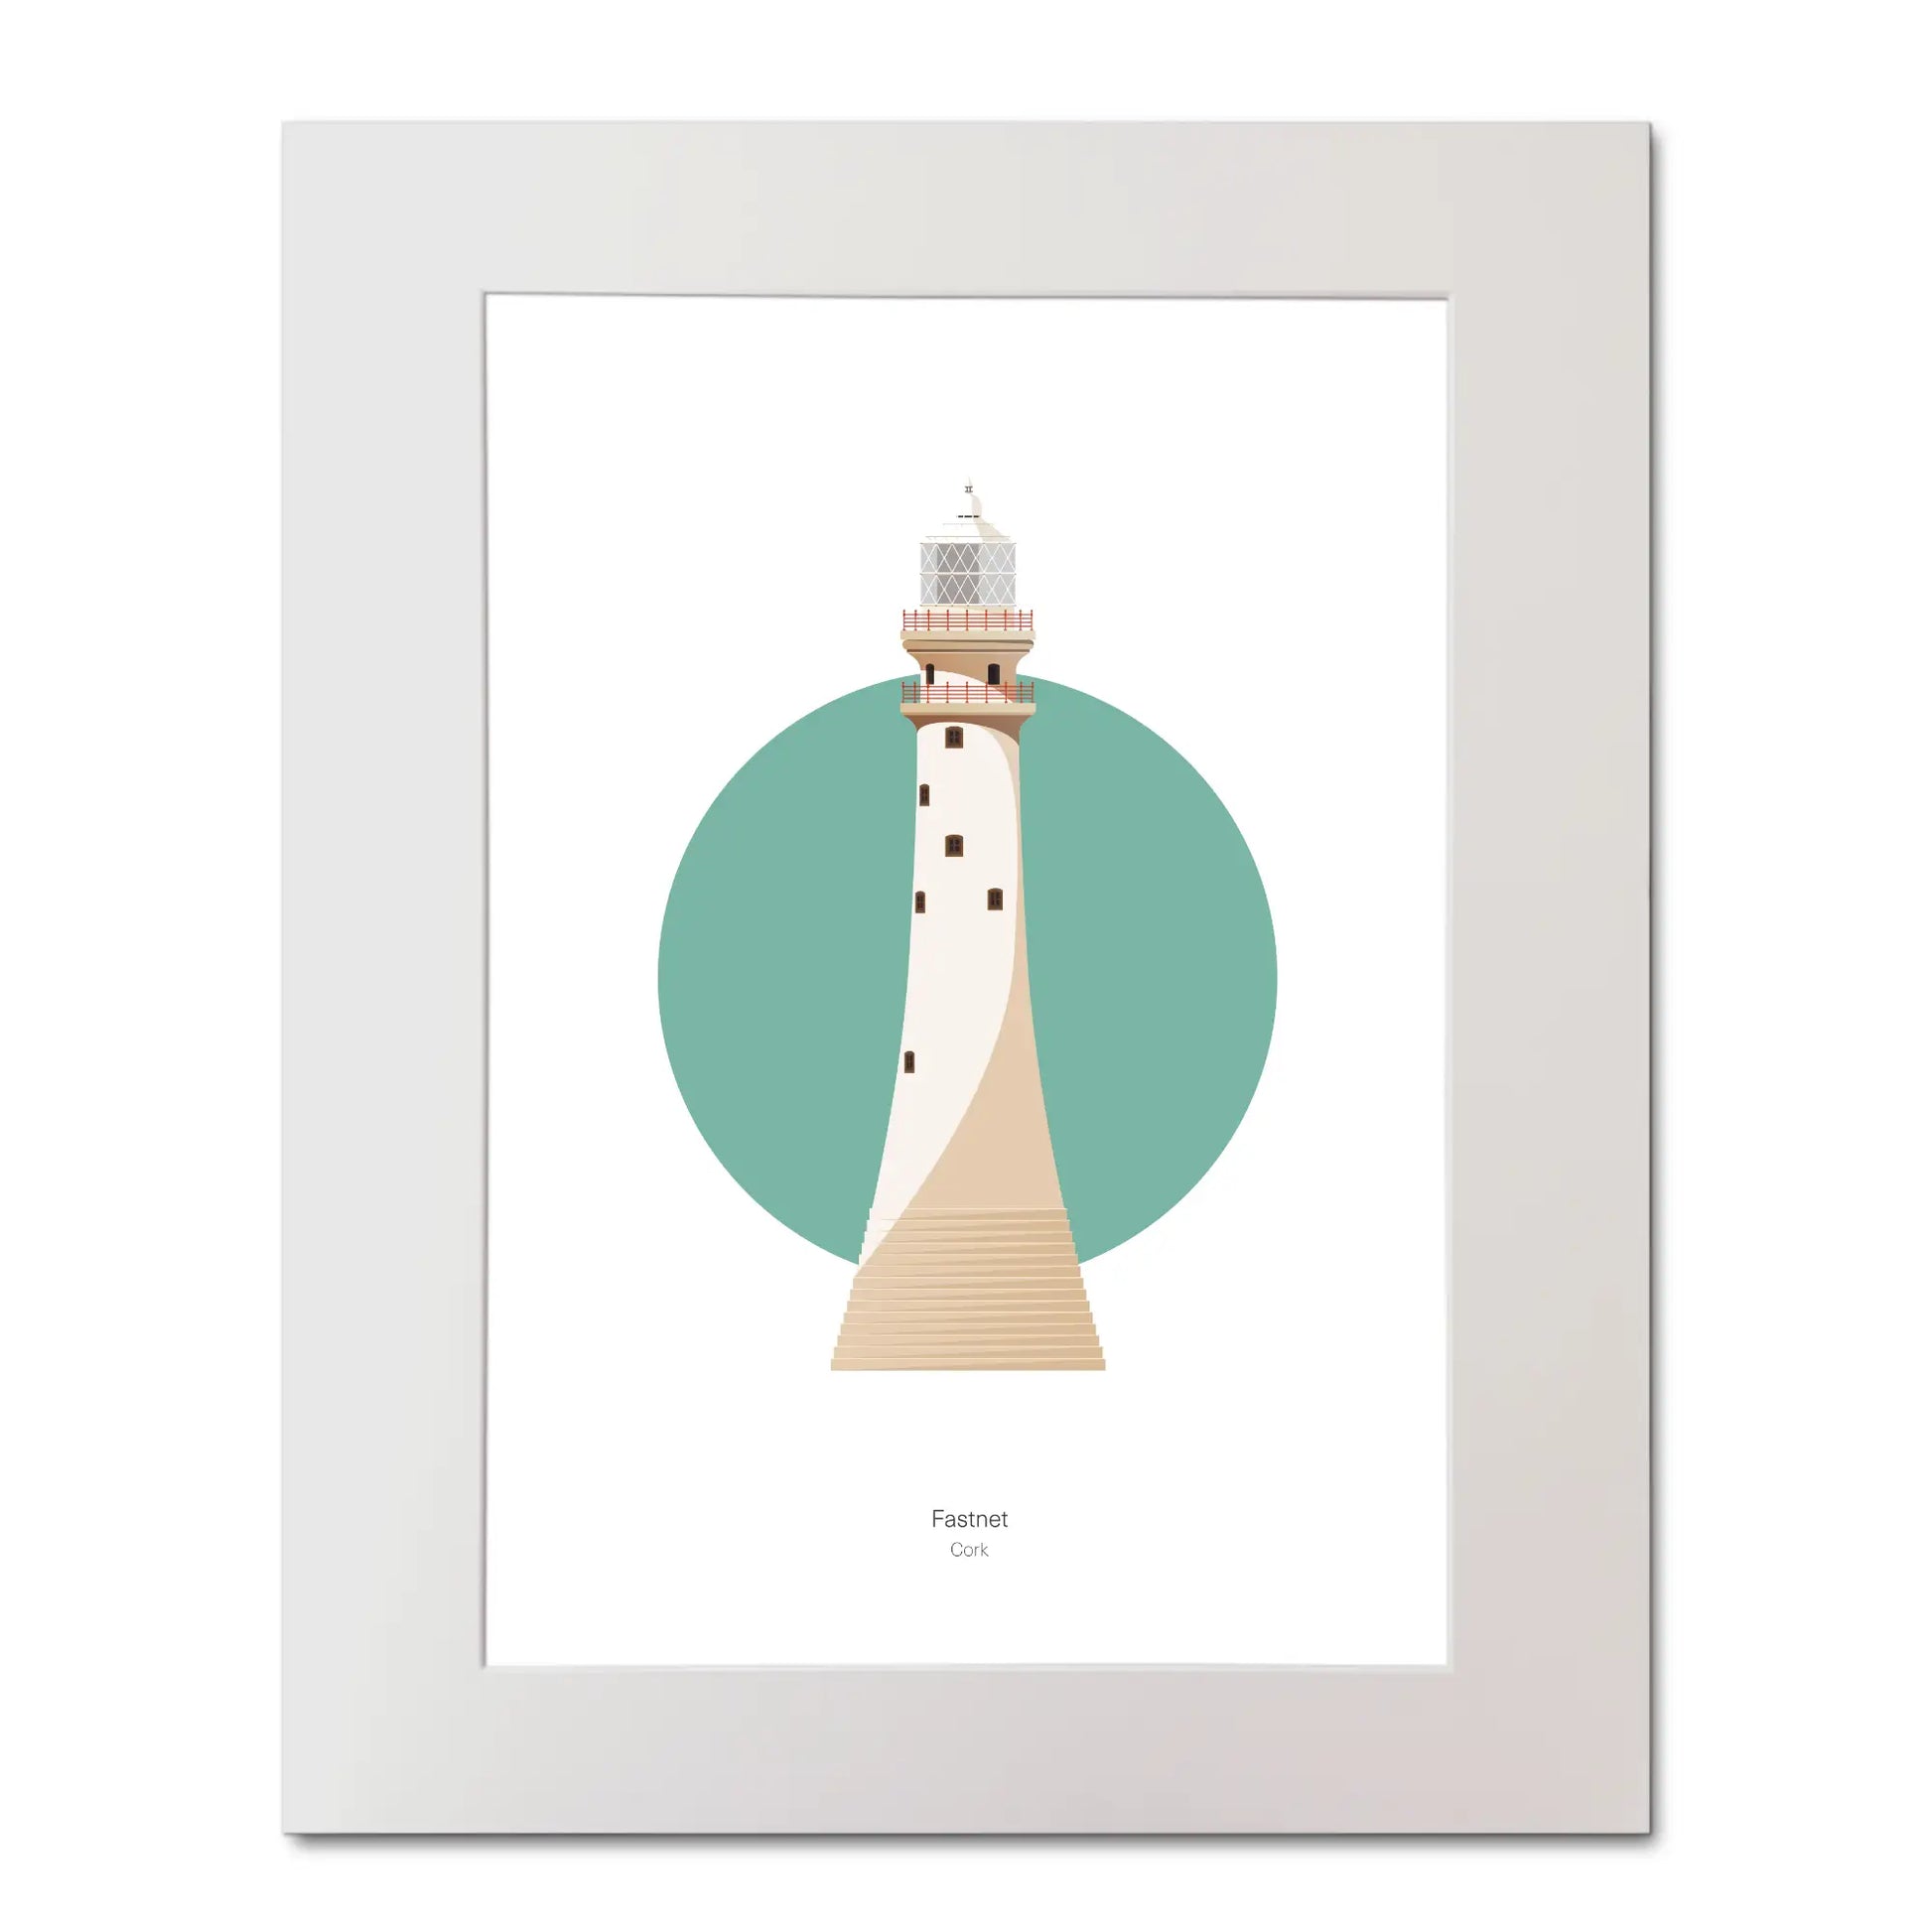 Illustration of Fastnet lighthouse on a white background inside light blue square, mounted and measuring 40x50cm.